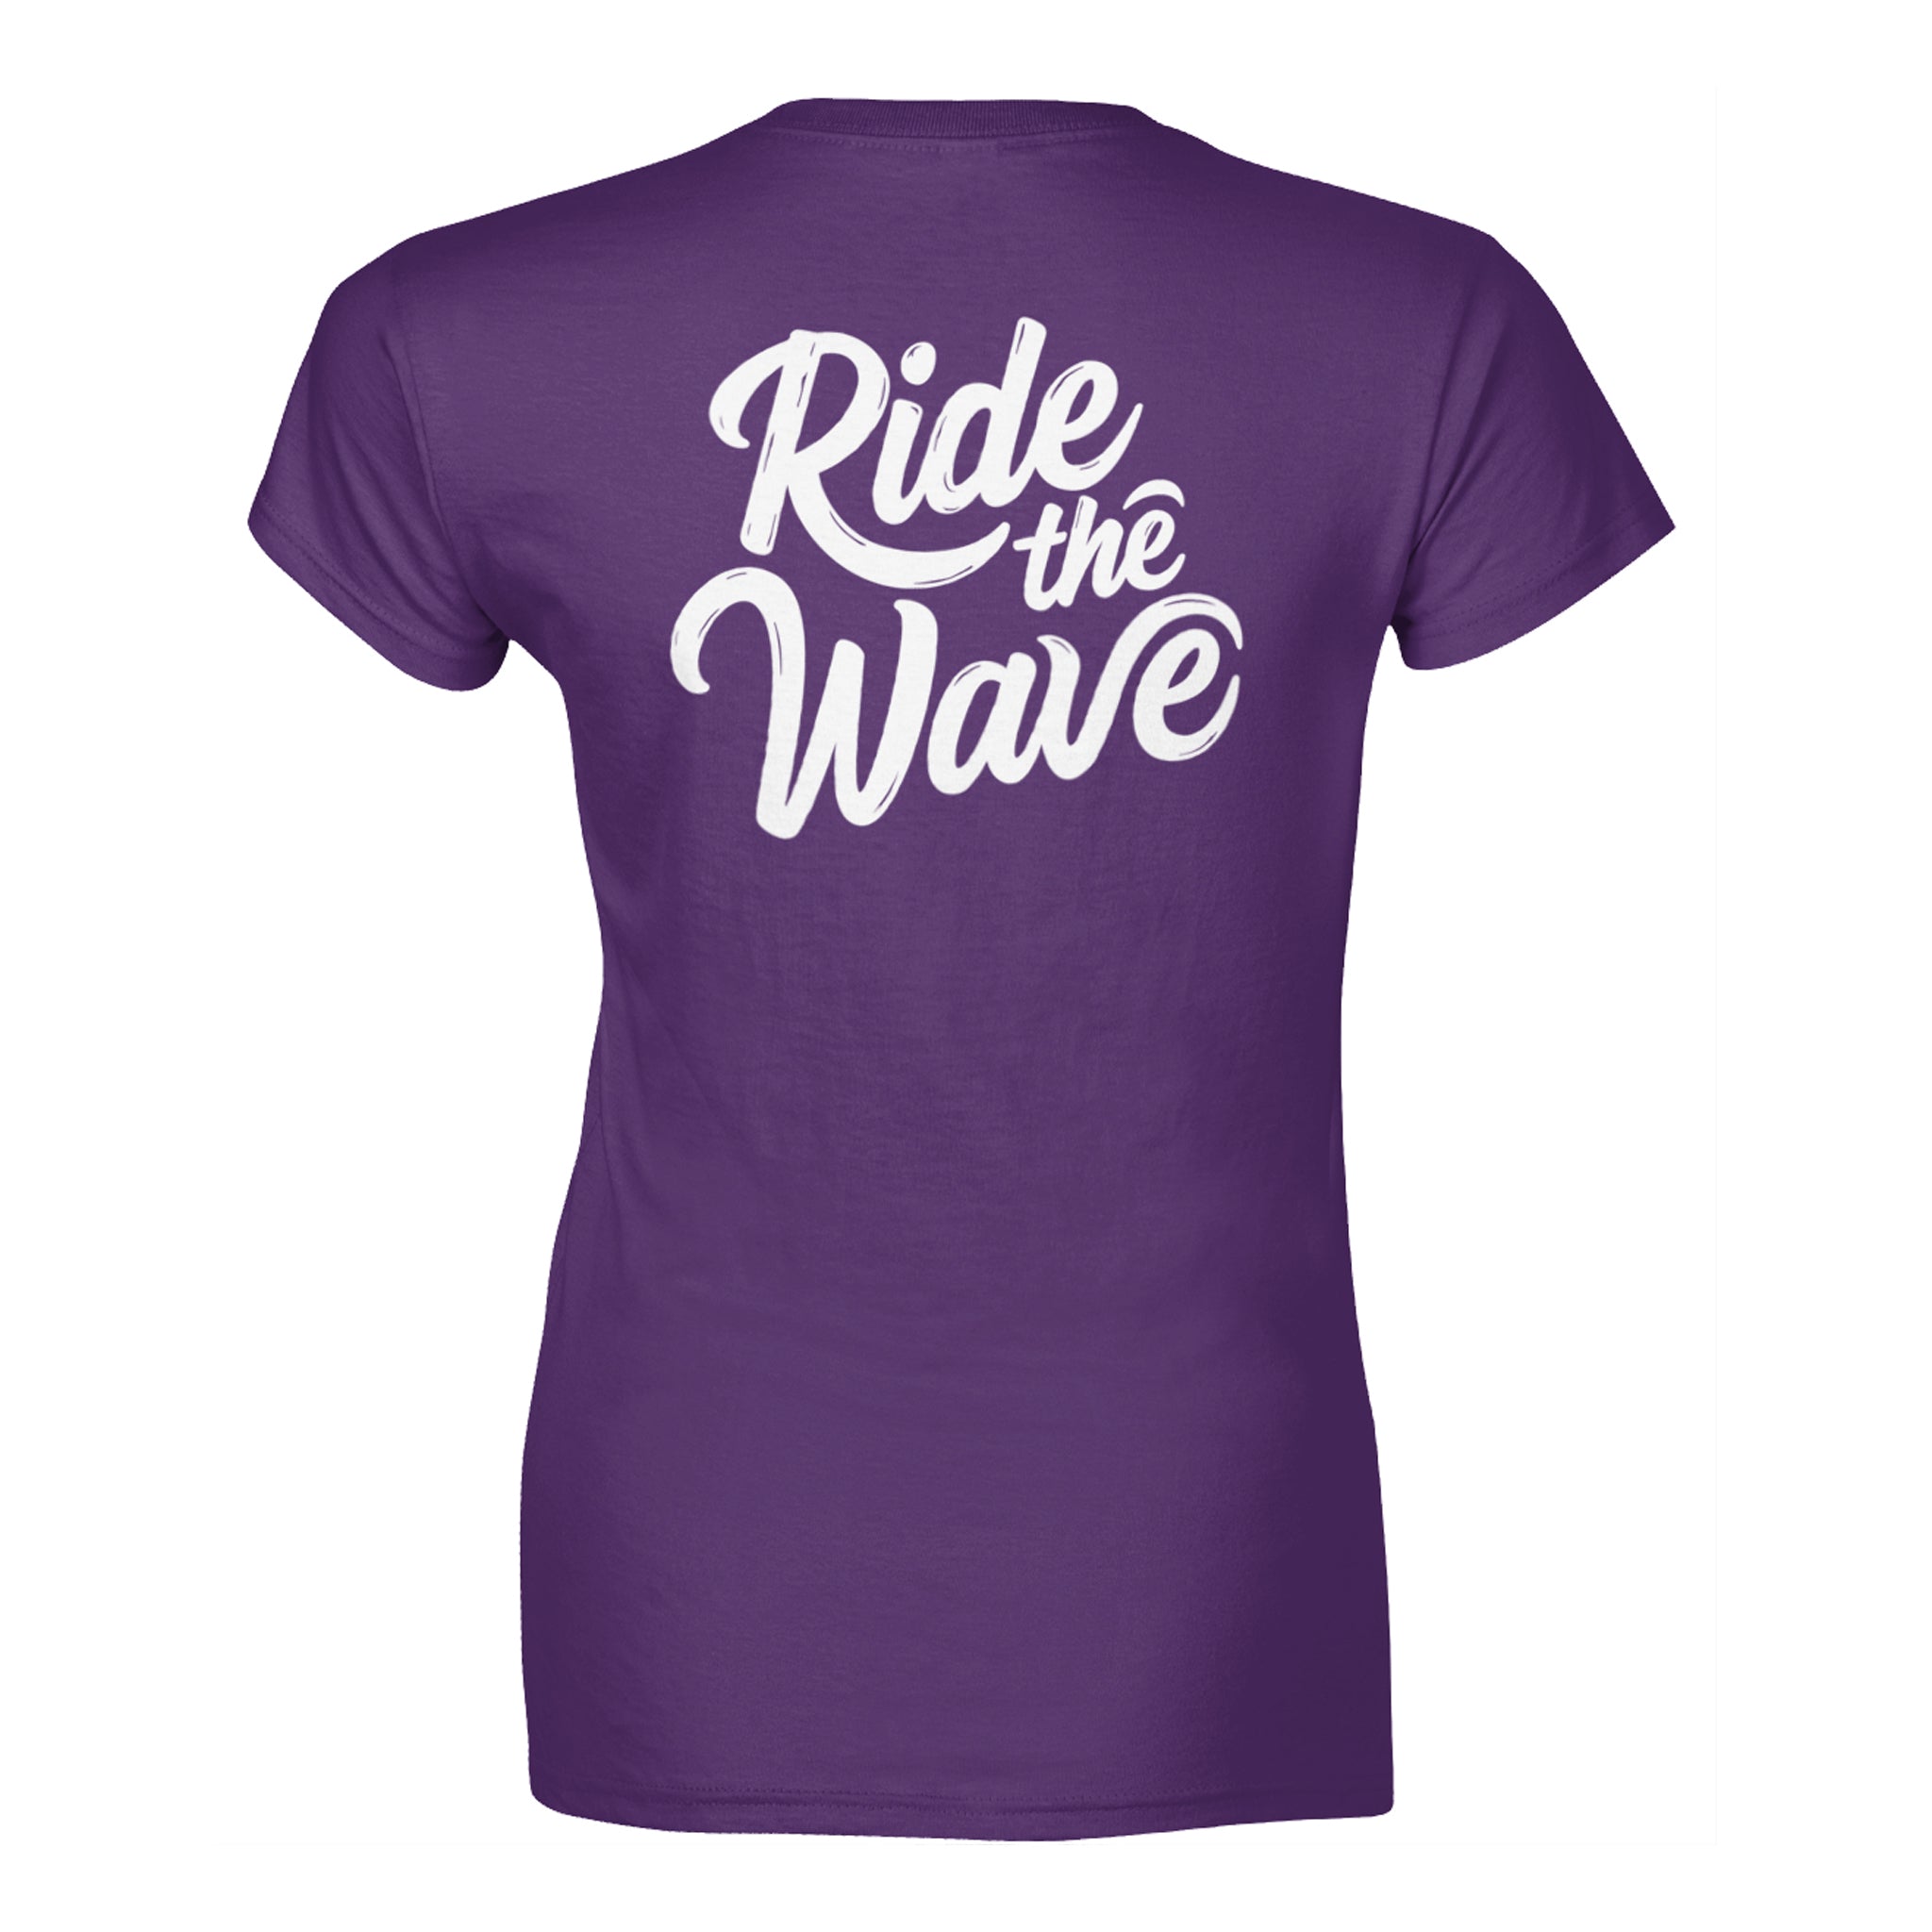 'Ride the Wave' Womens T-Shirt (White Water Edition) Outlet